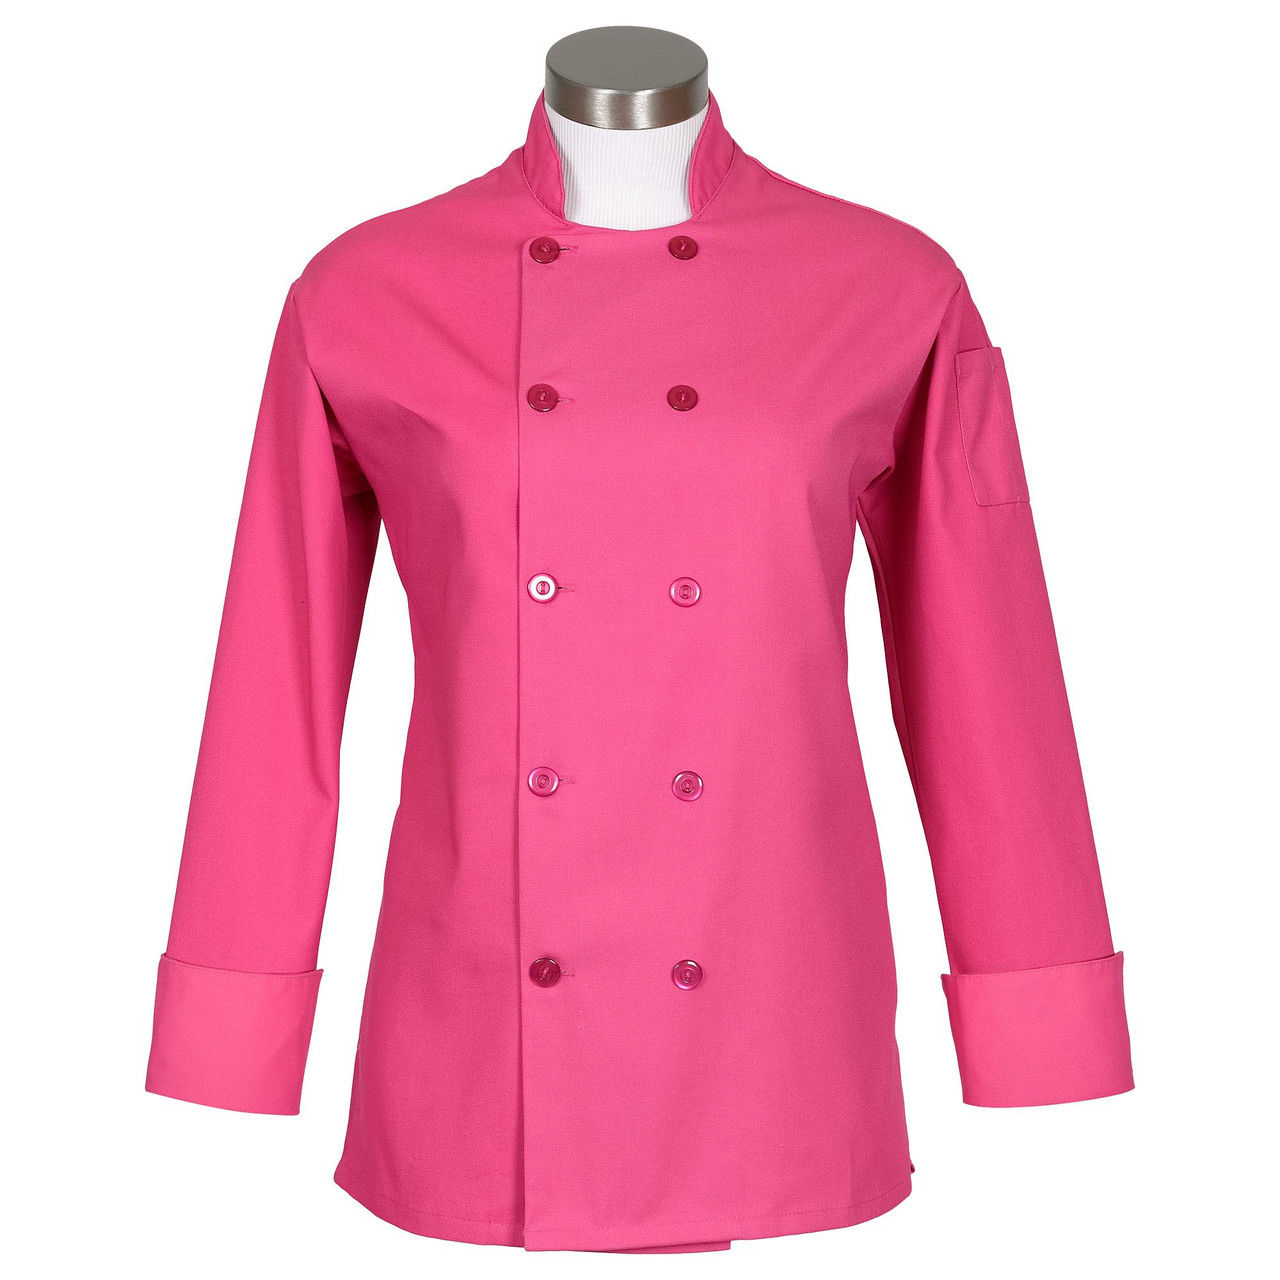 Where is the chef coats womens long sleeve shipped from?